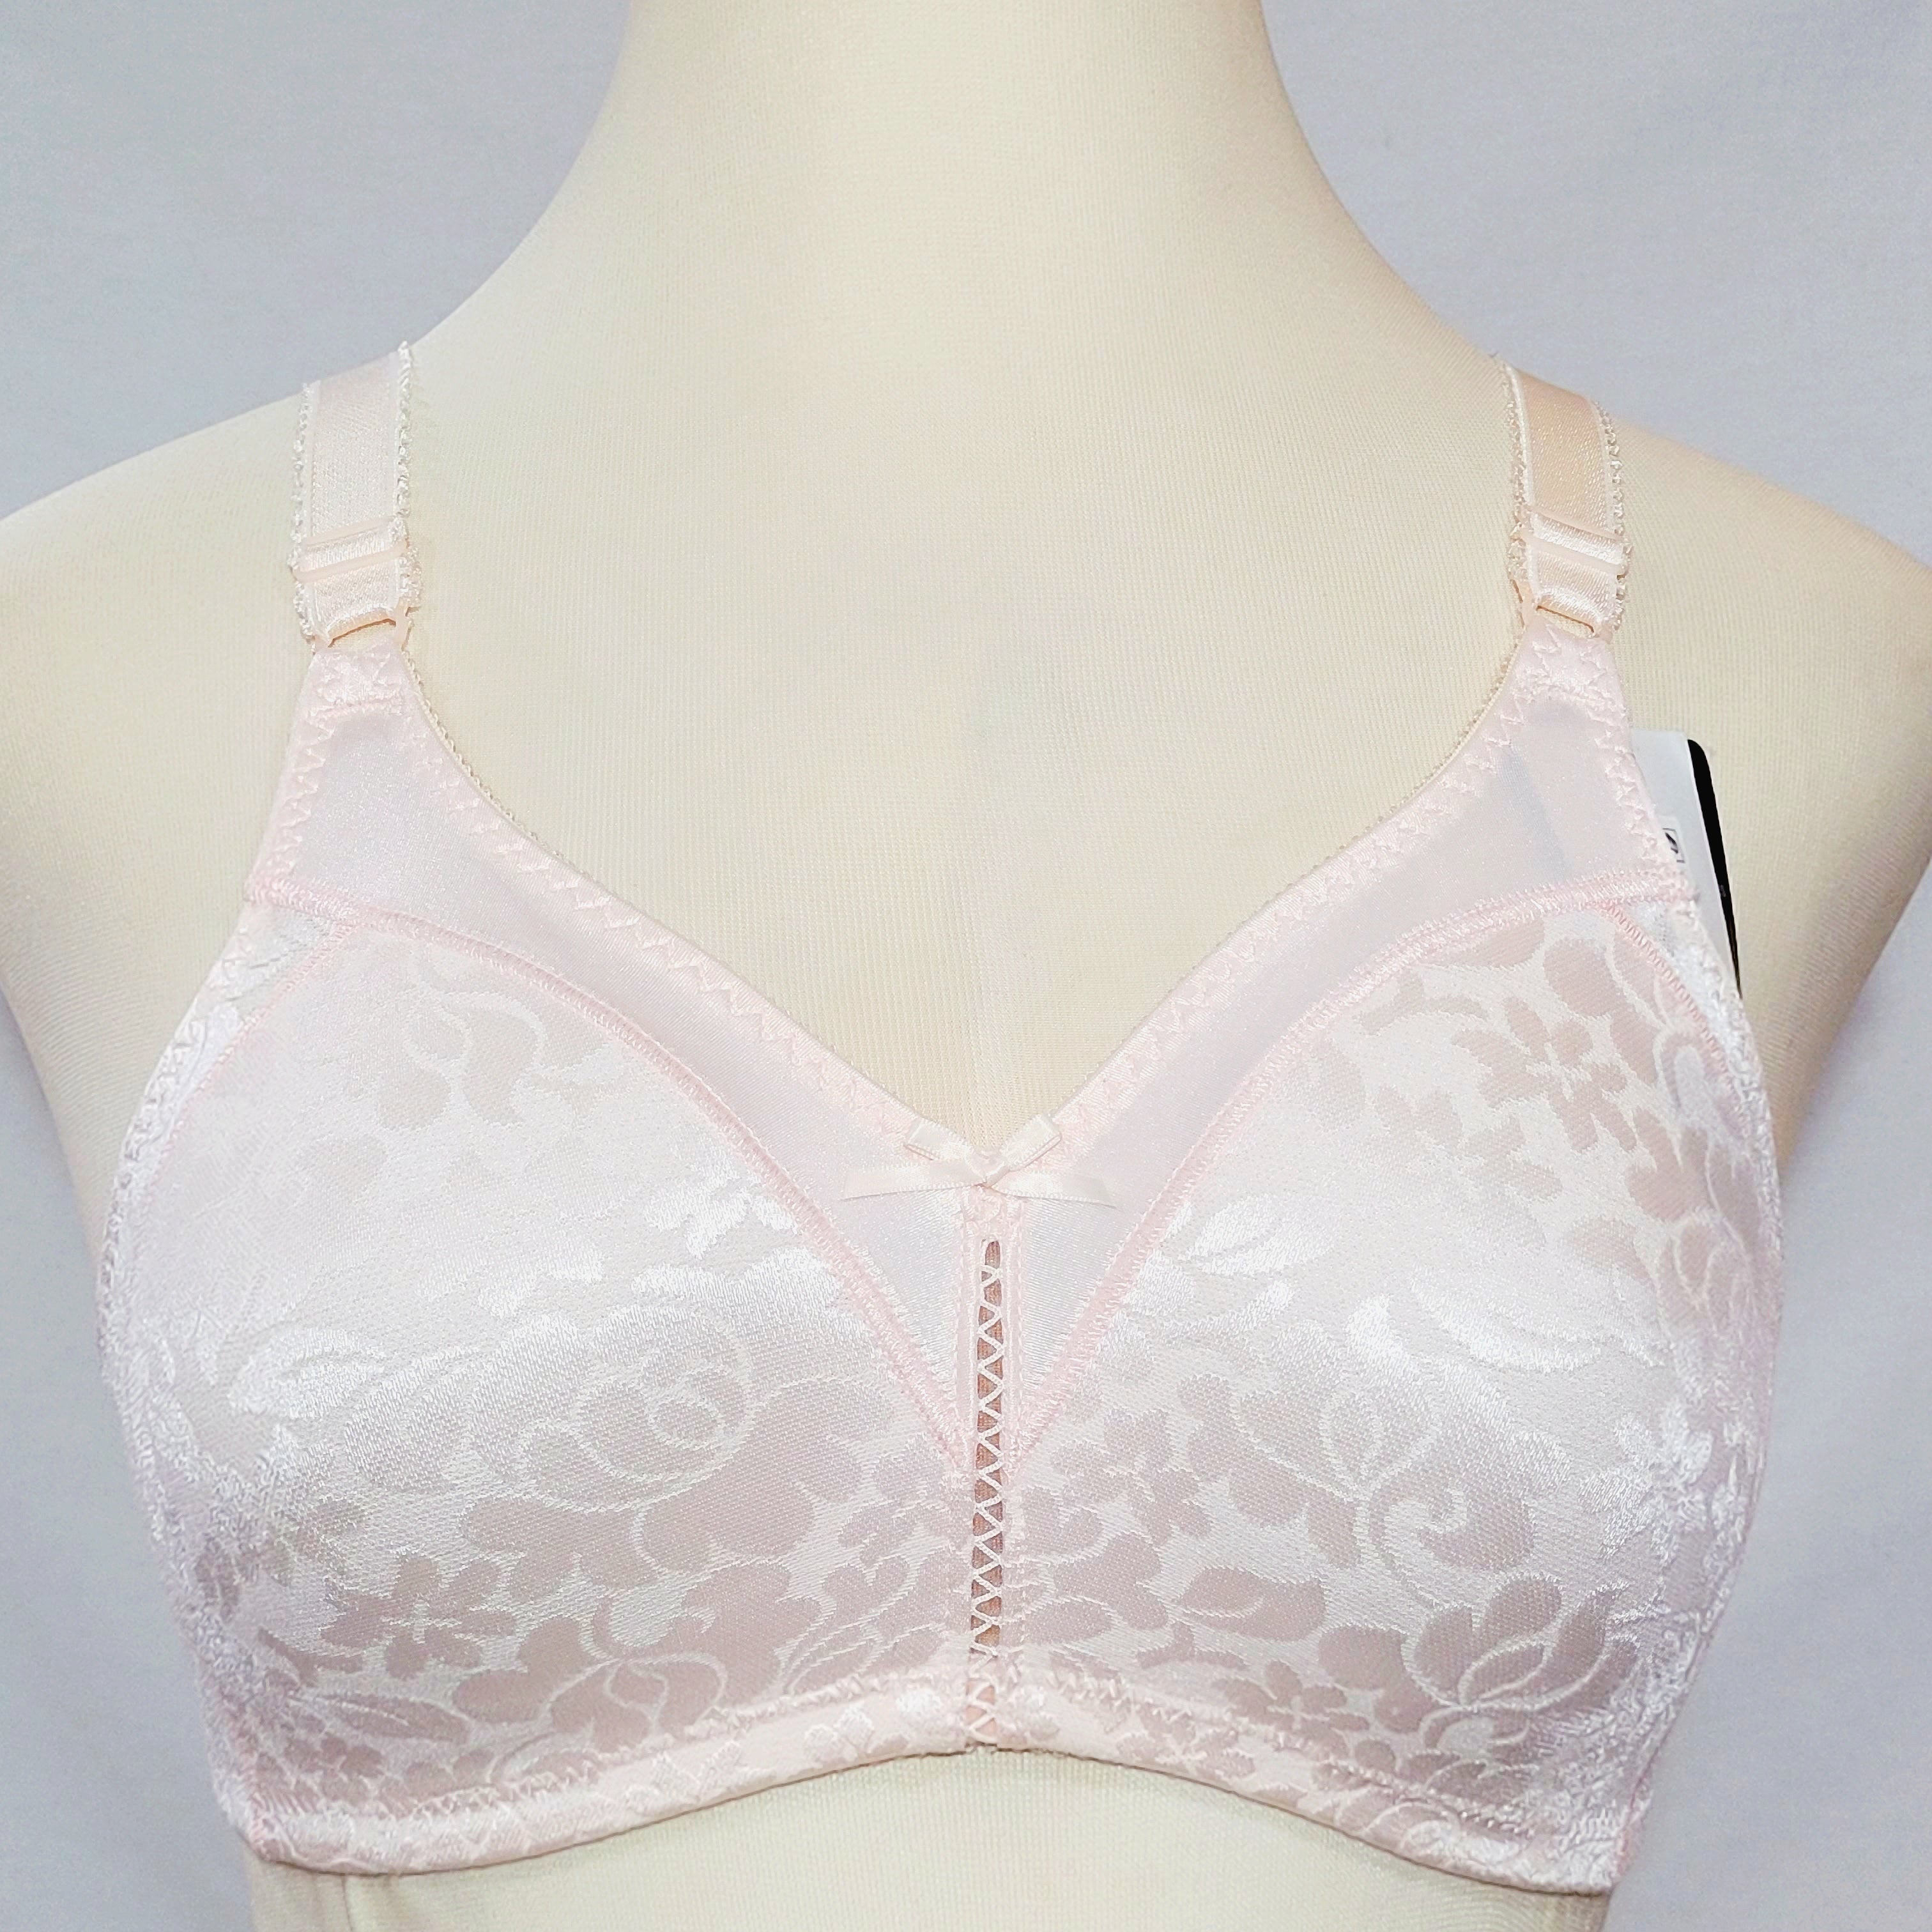 Bali 3372 Double Support Lace Wirefree Bra 36B Pink NWT